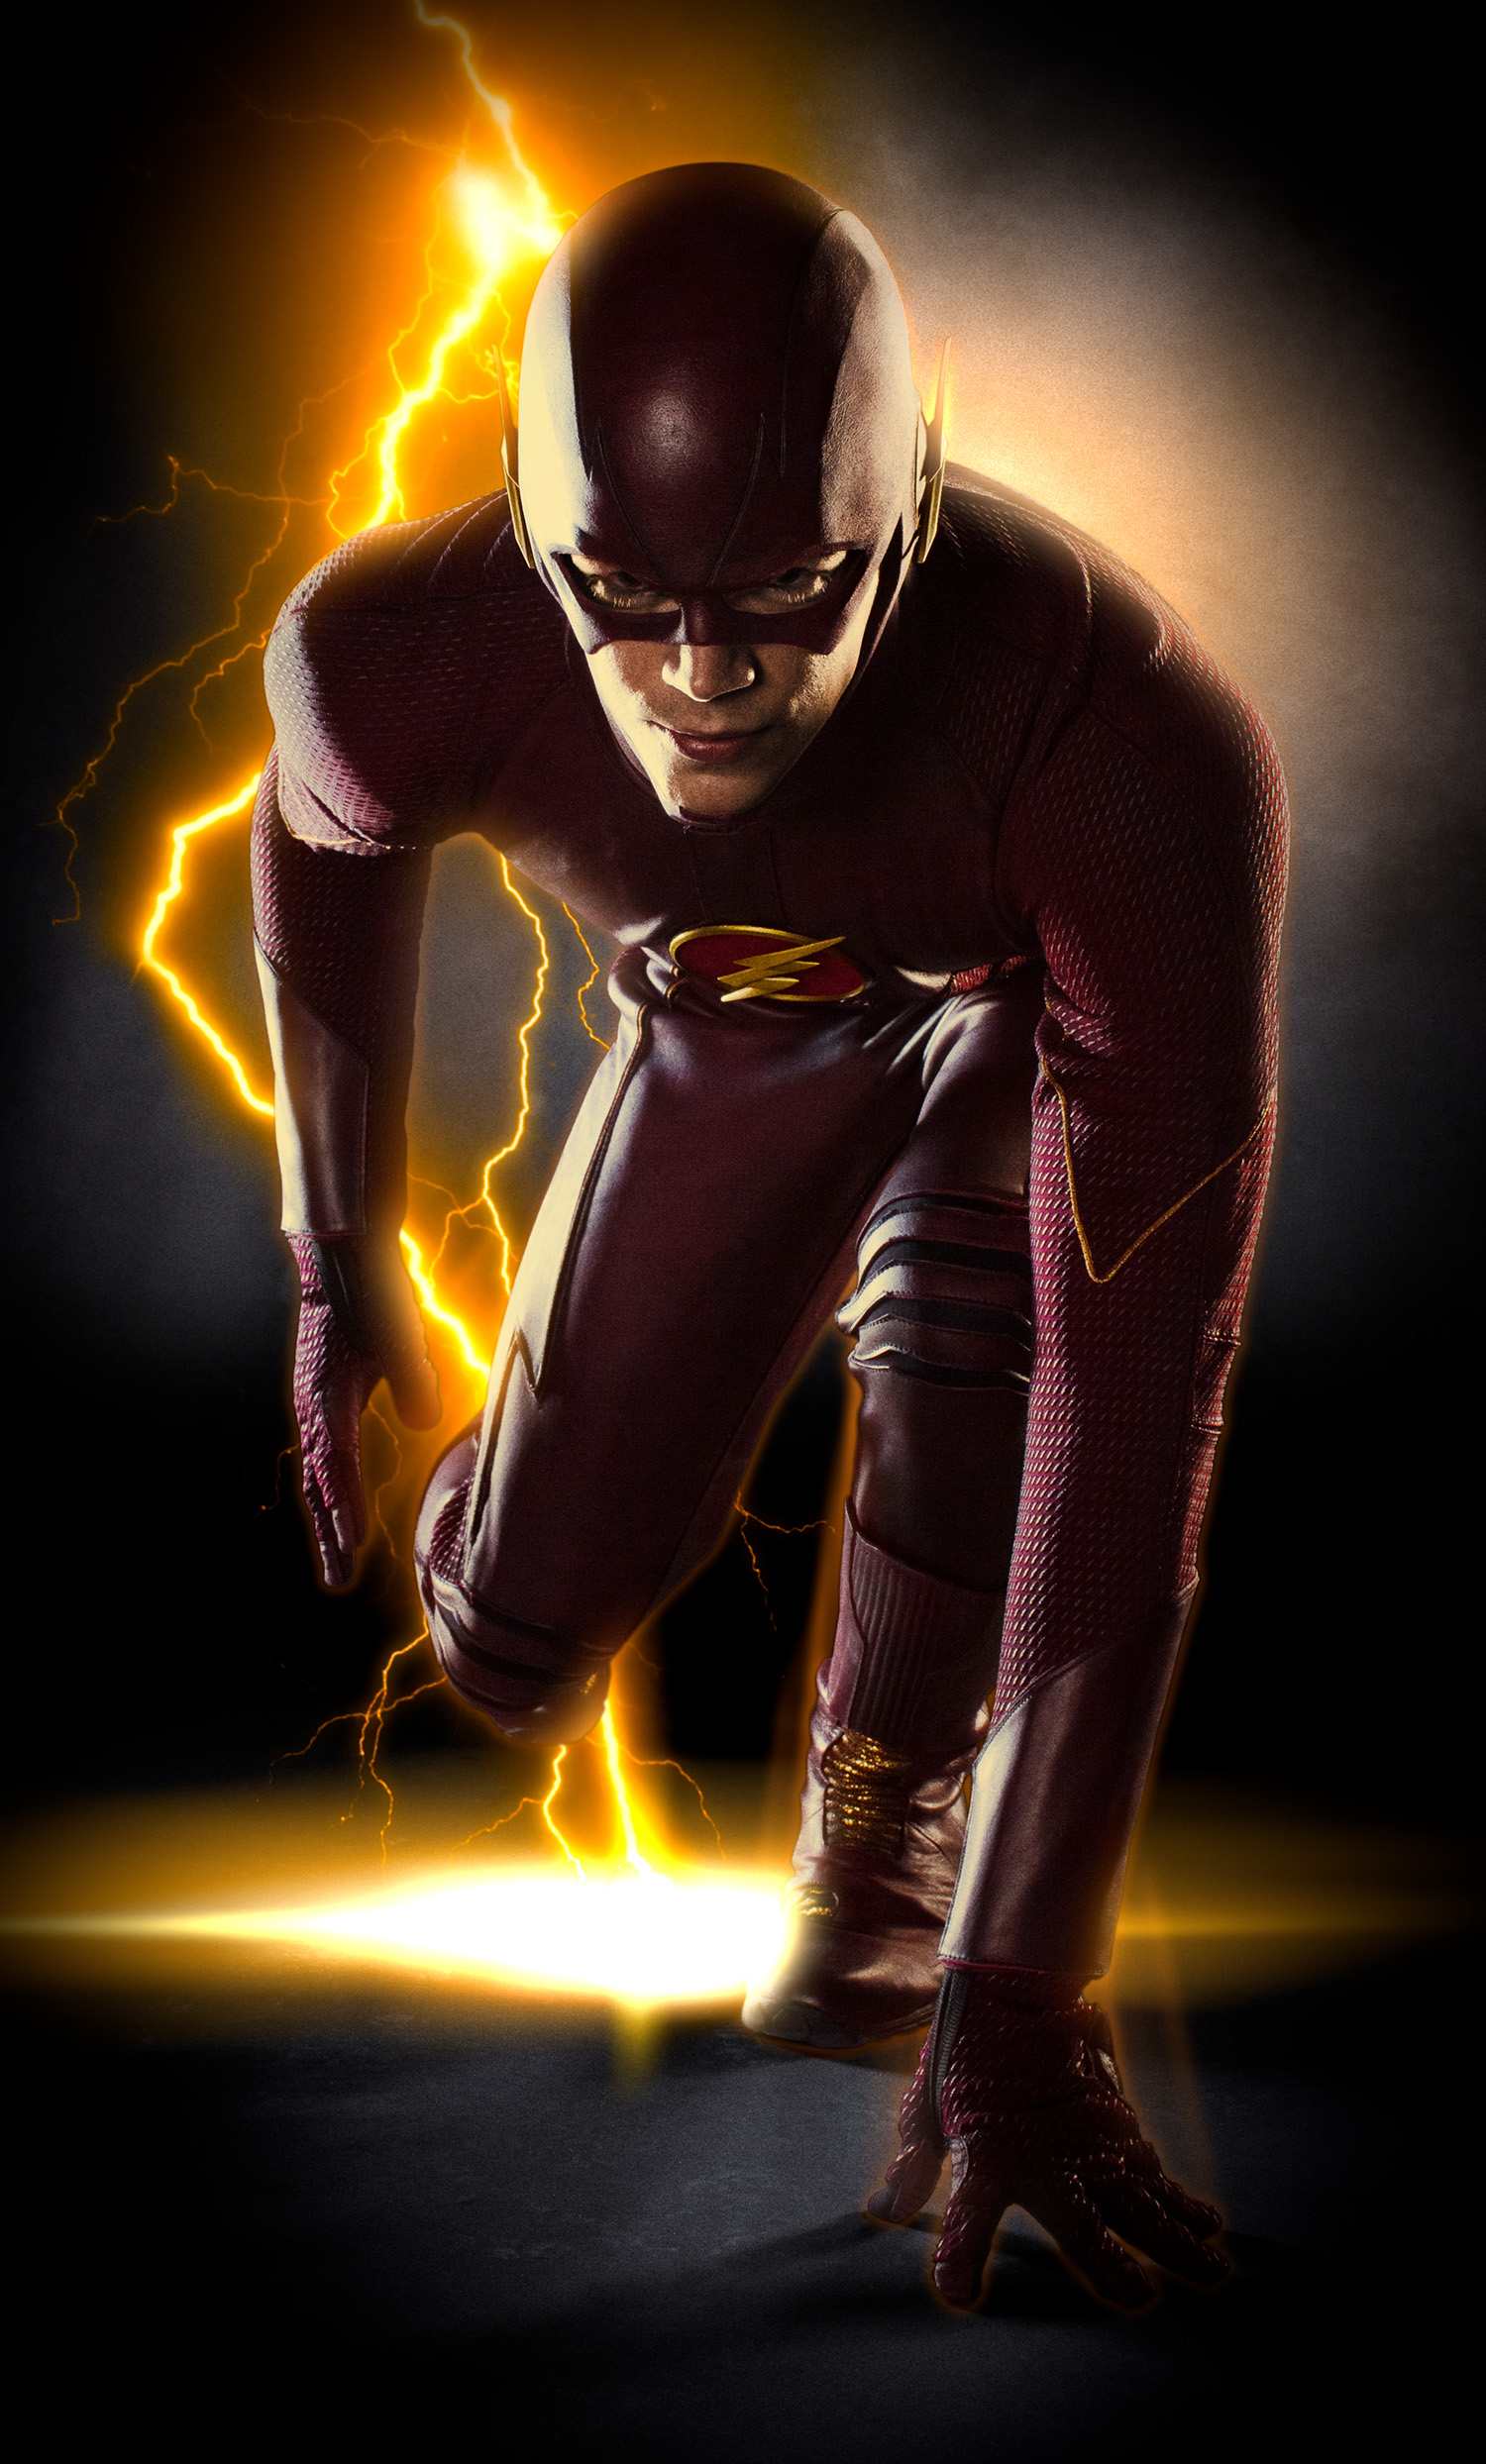 Full Suit Image The Flash Tv Series Official Costume